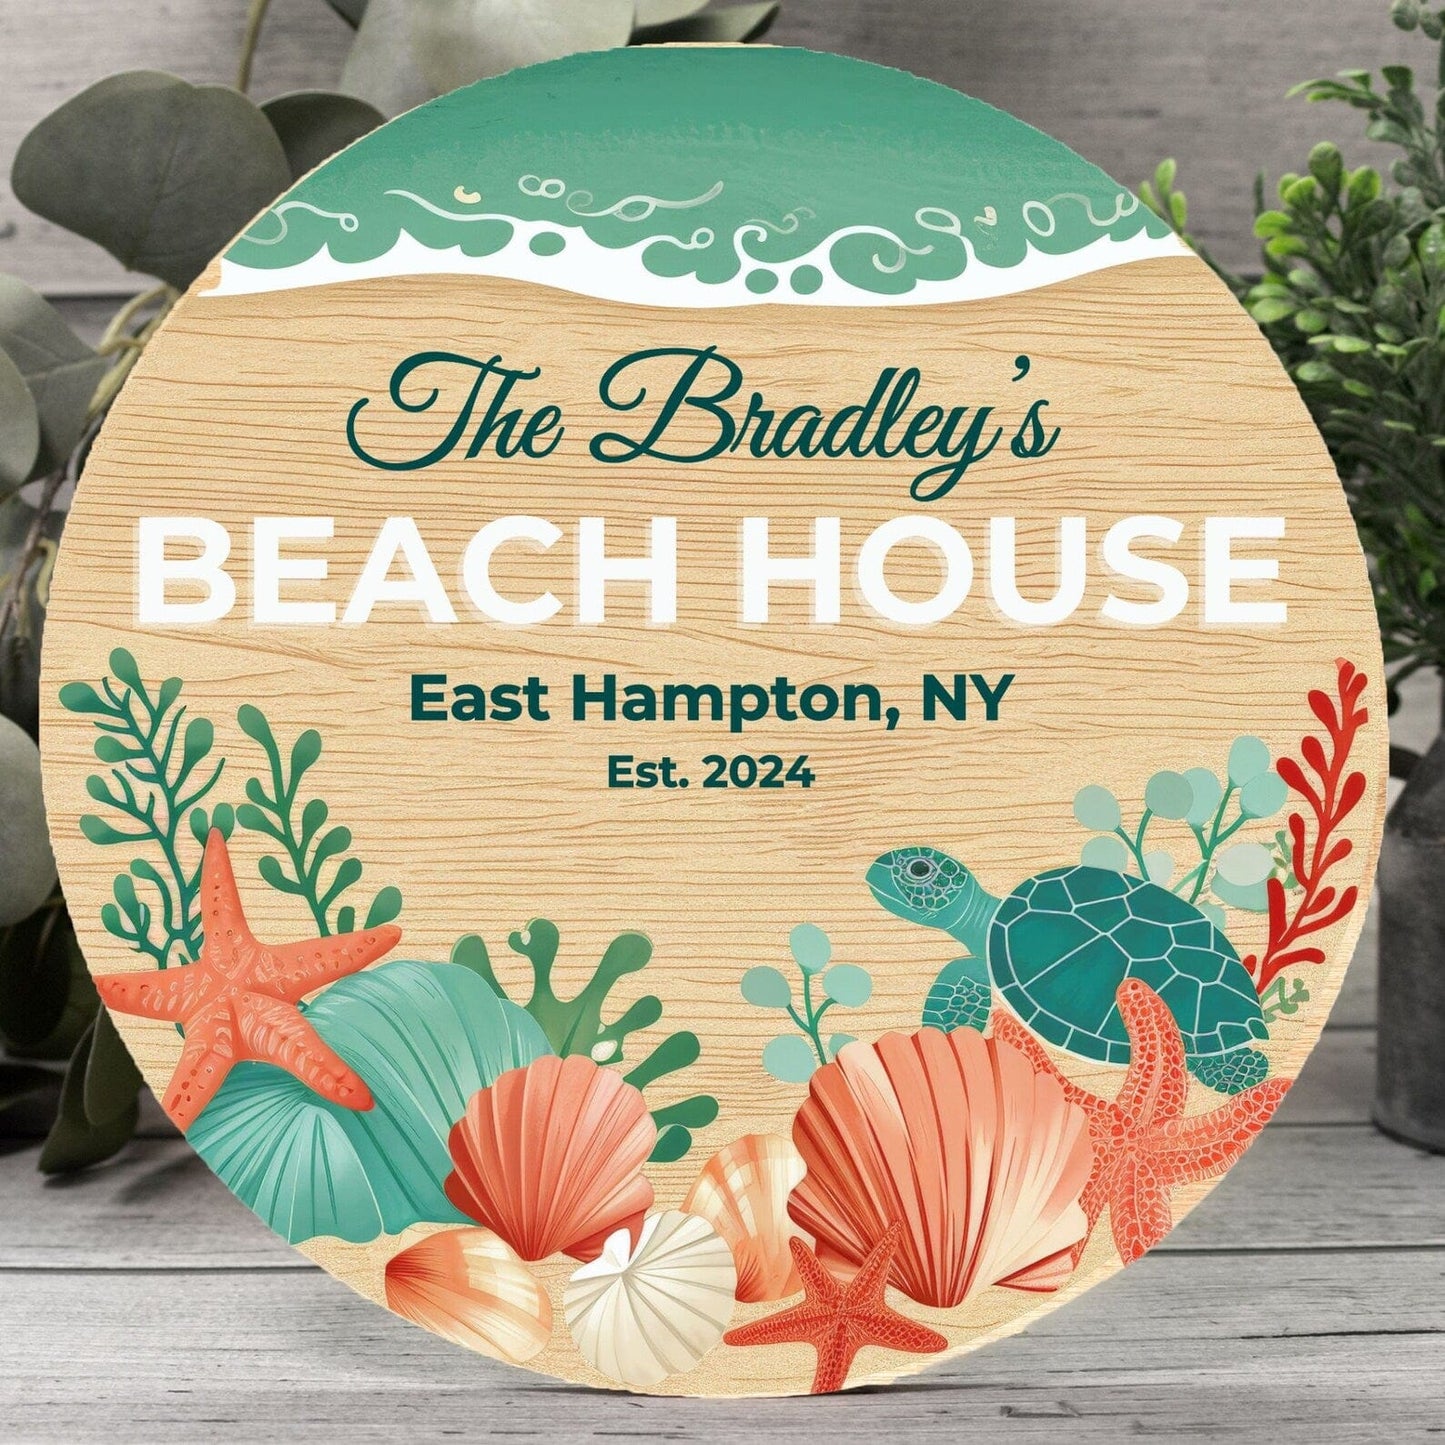 Kate McEnroe New York Personalized Beach House Door Sign, Coastal Welcome Wood Entry Hanger 12" (Round) Wood Round Signs Personalized Beach House Door Sign, Coastal Welcome Wood Entry Hanger 12" (Round) PMH58-12.2460822